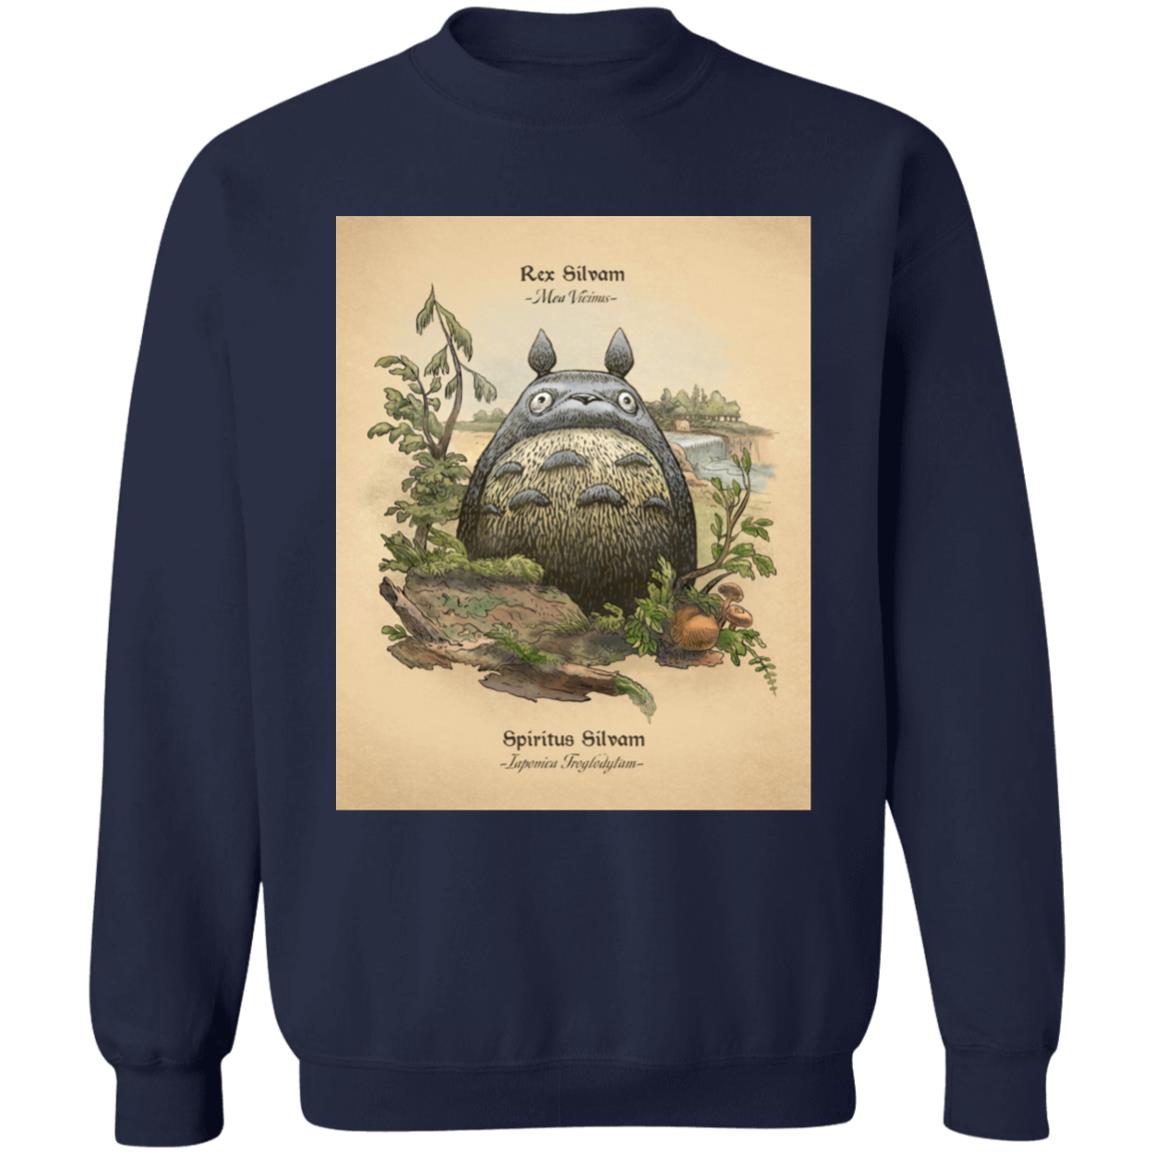 Totoro in the Forest Classic Sweatshirt